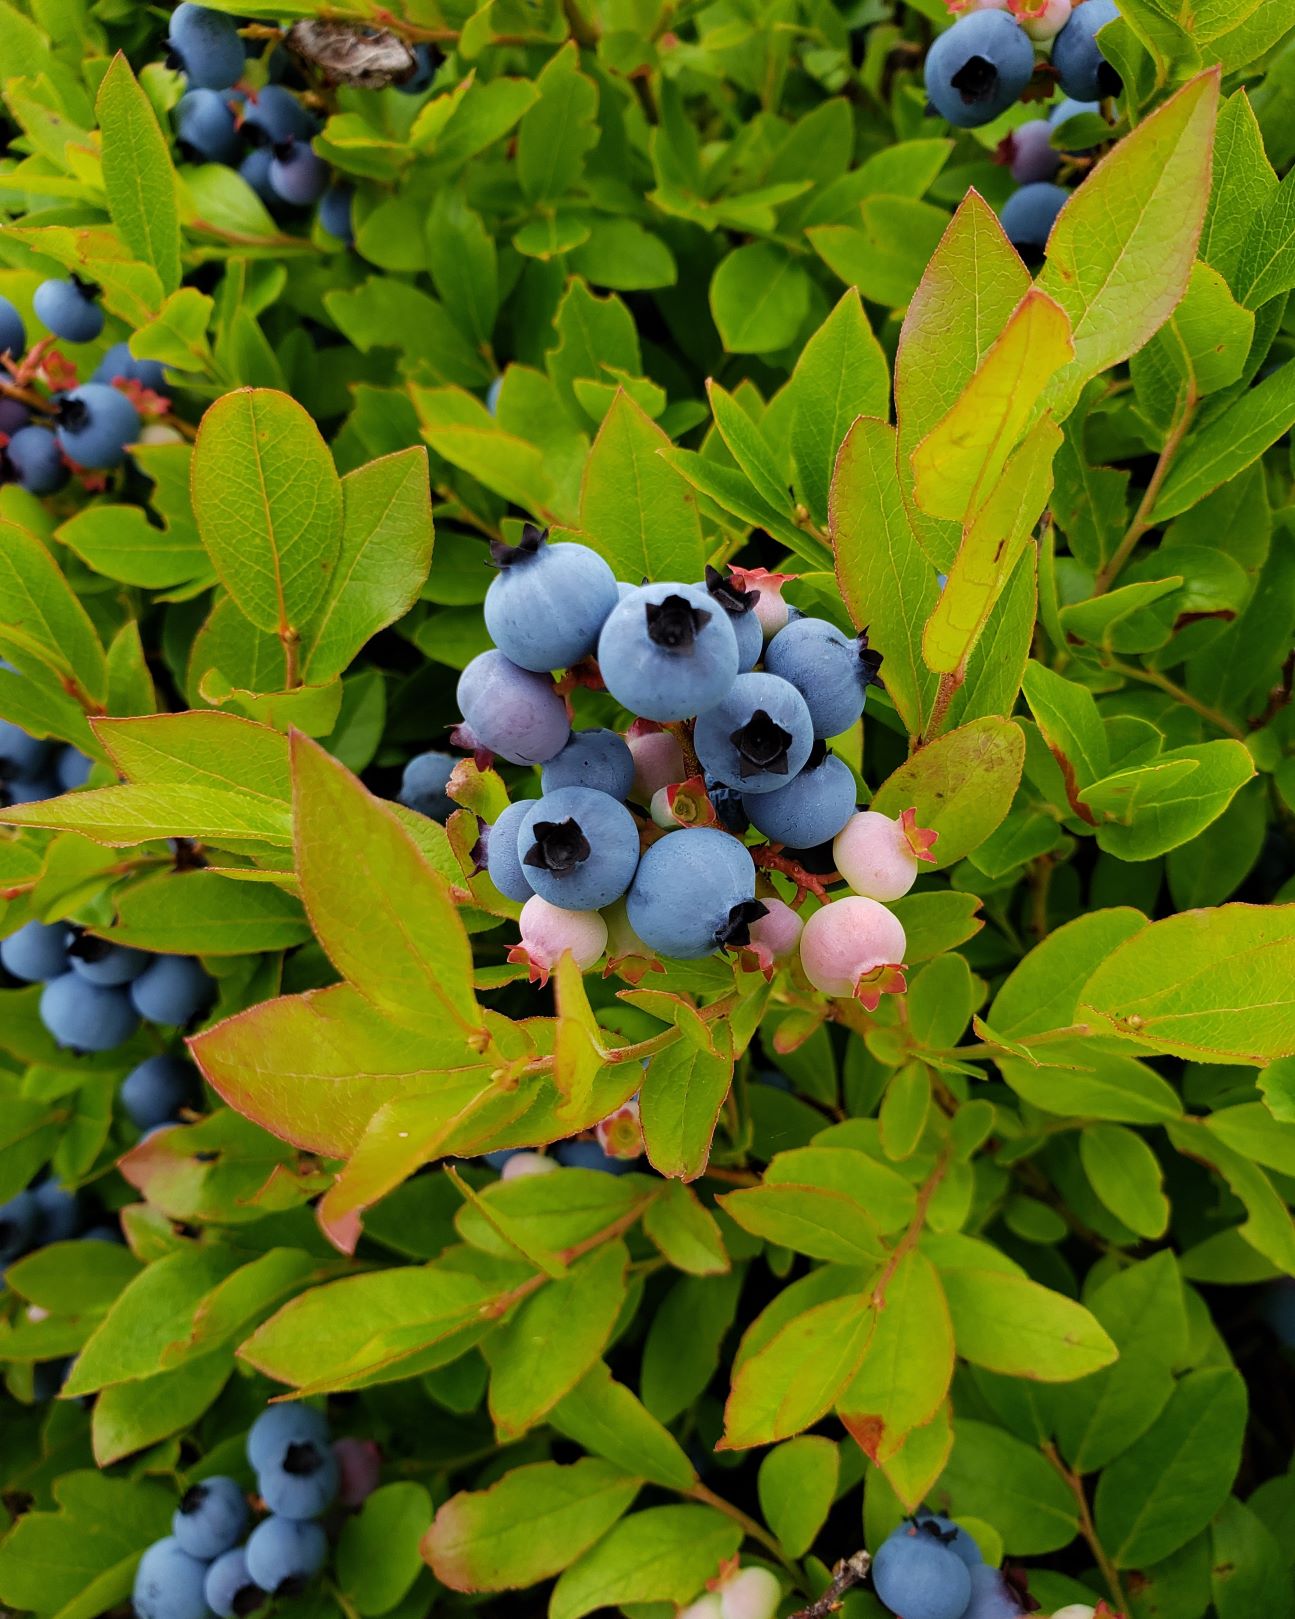 blueberries growing in the wild